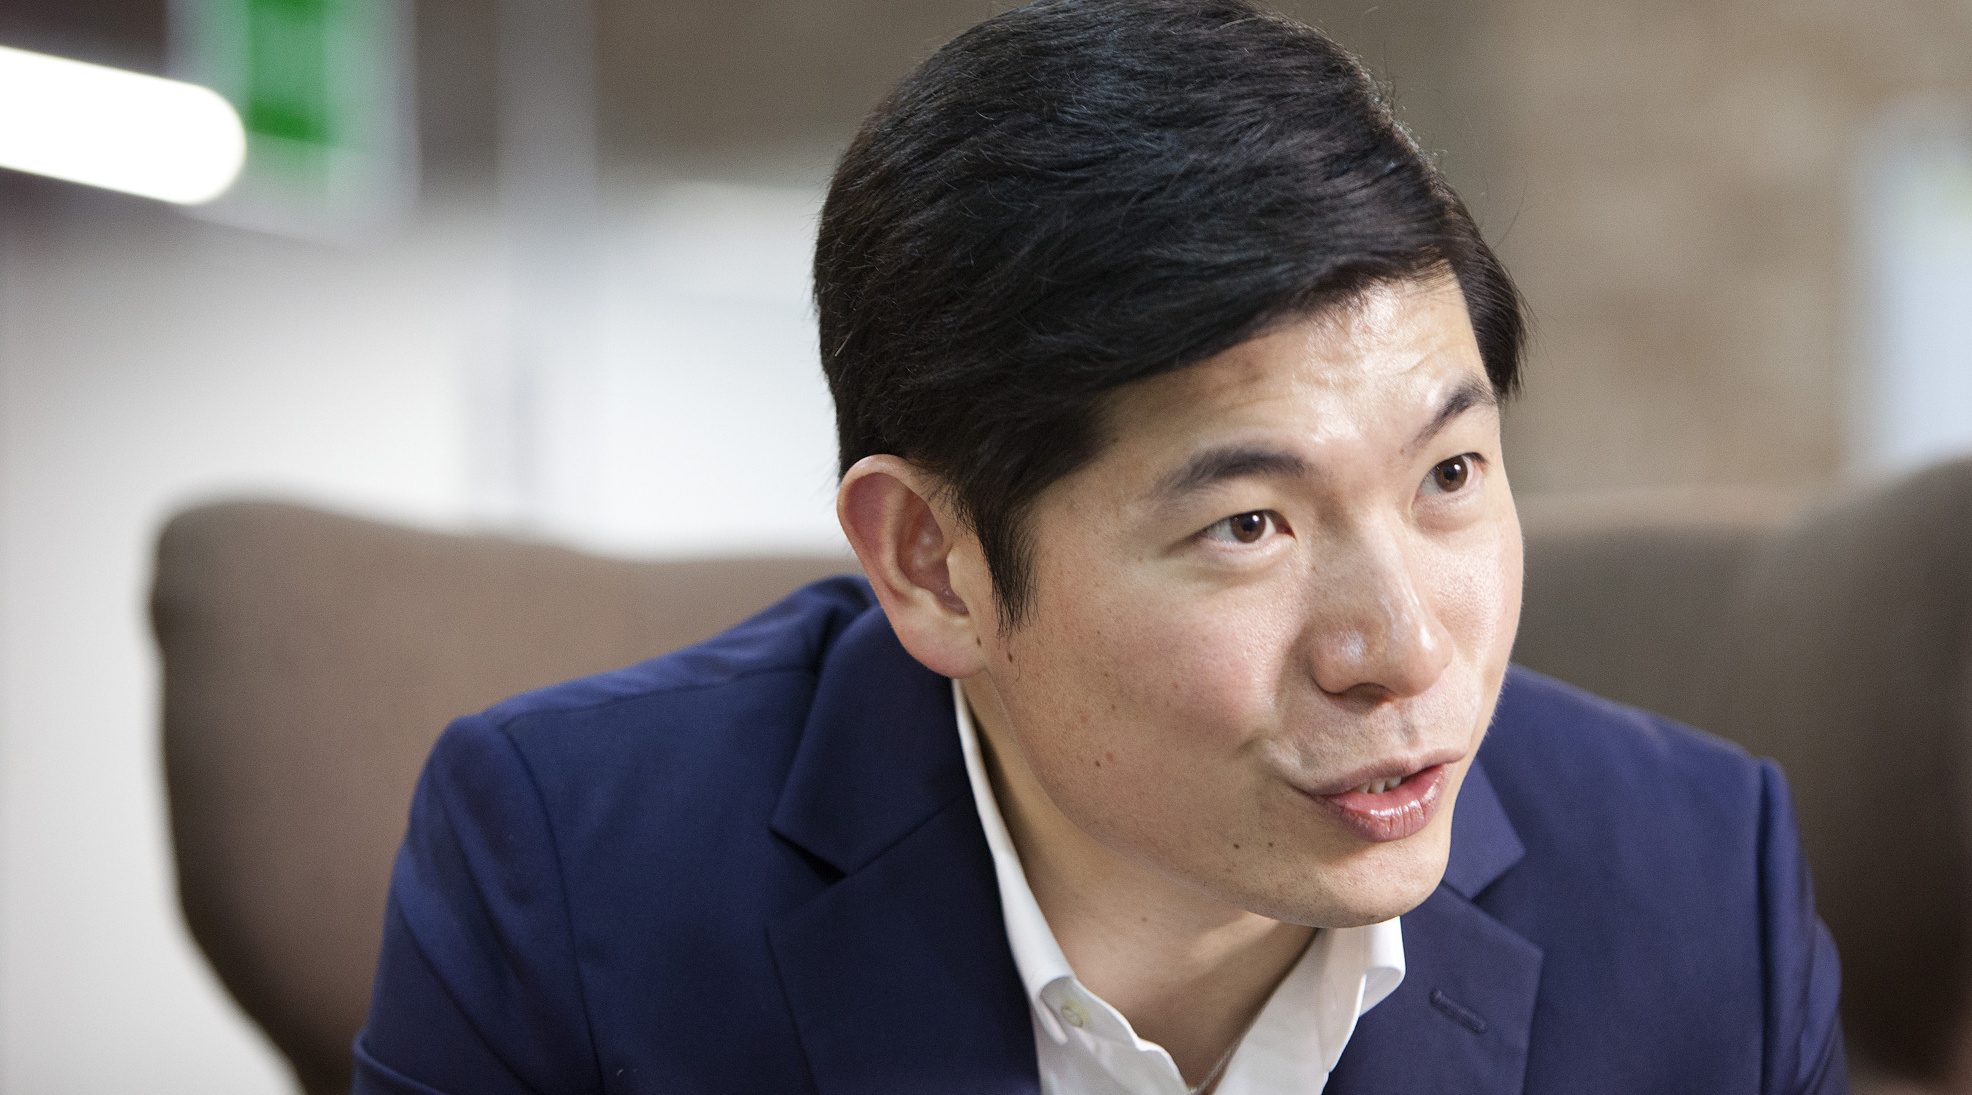 Grab Ventures will invest in the next generation of tech leaders: Grab CEO Anthony Tan